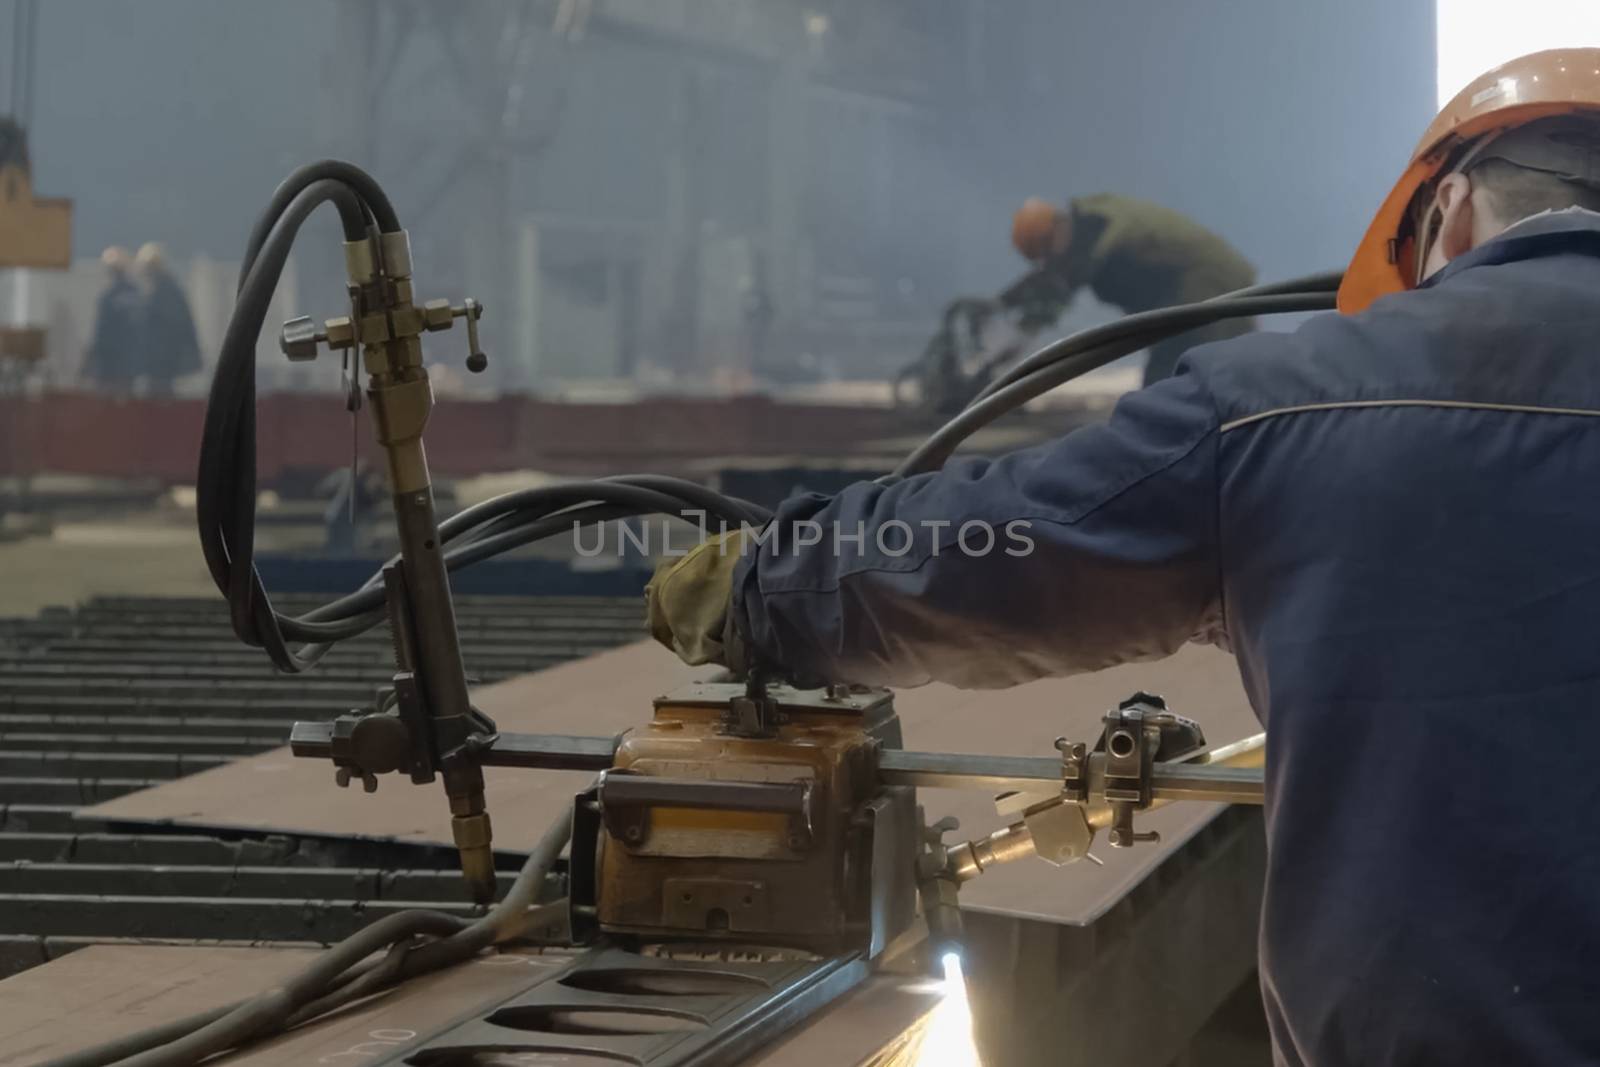 Novorossiysk, Russia - May 26, 2018: The worker welds the details with welding on the welding machine. Mechanization of welding.